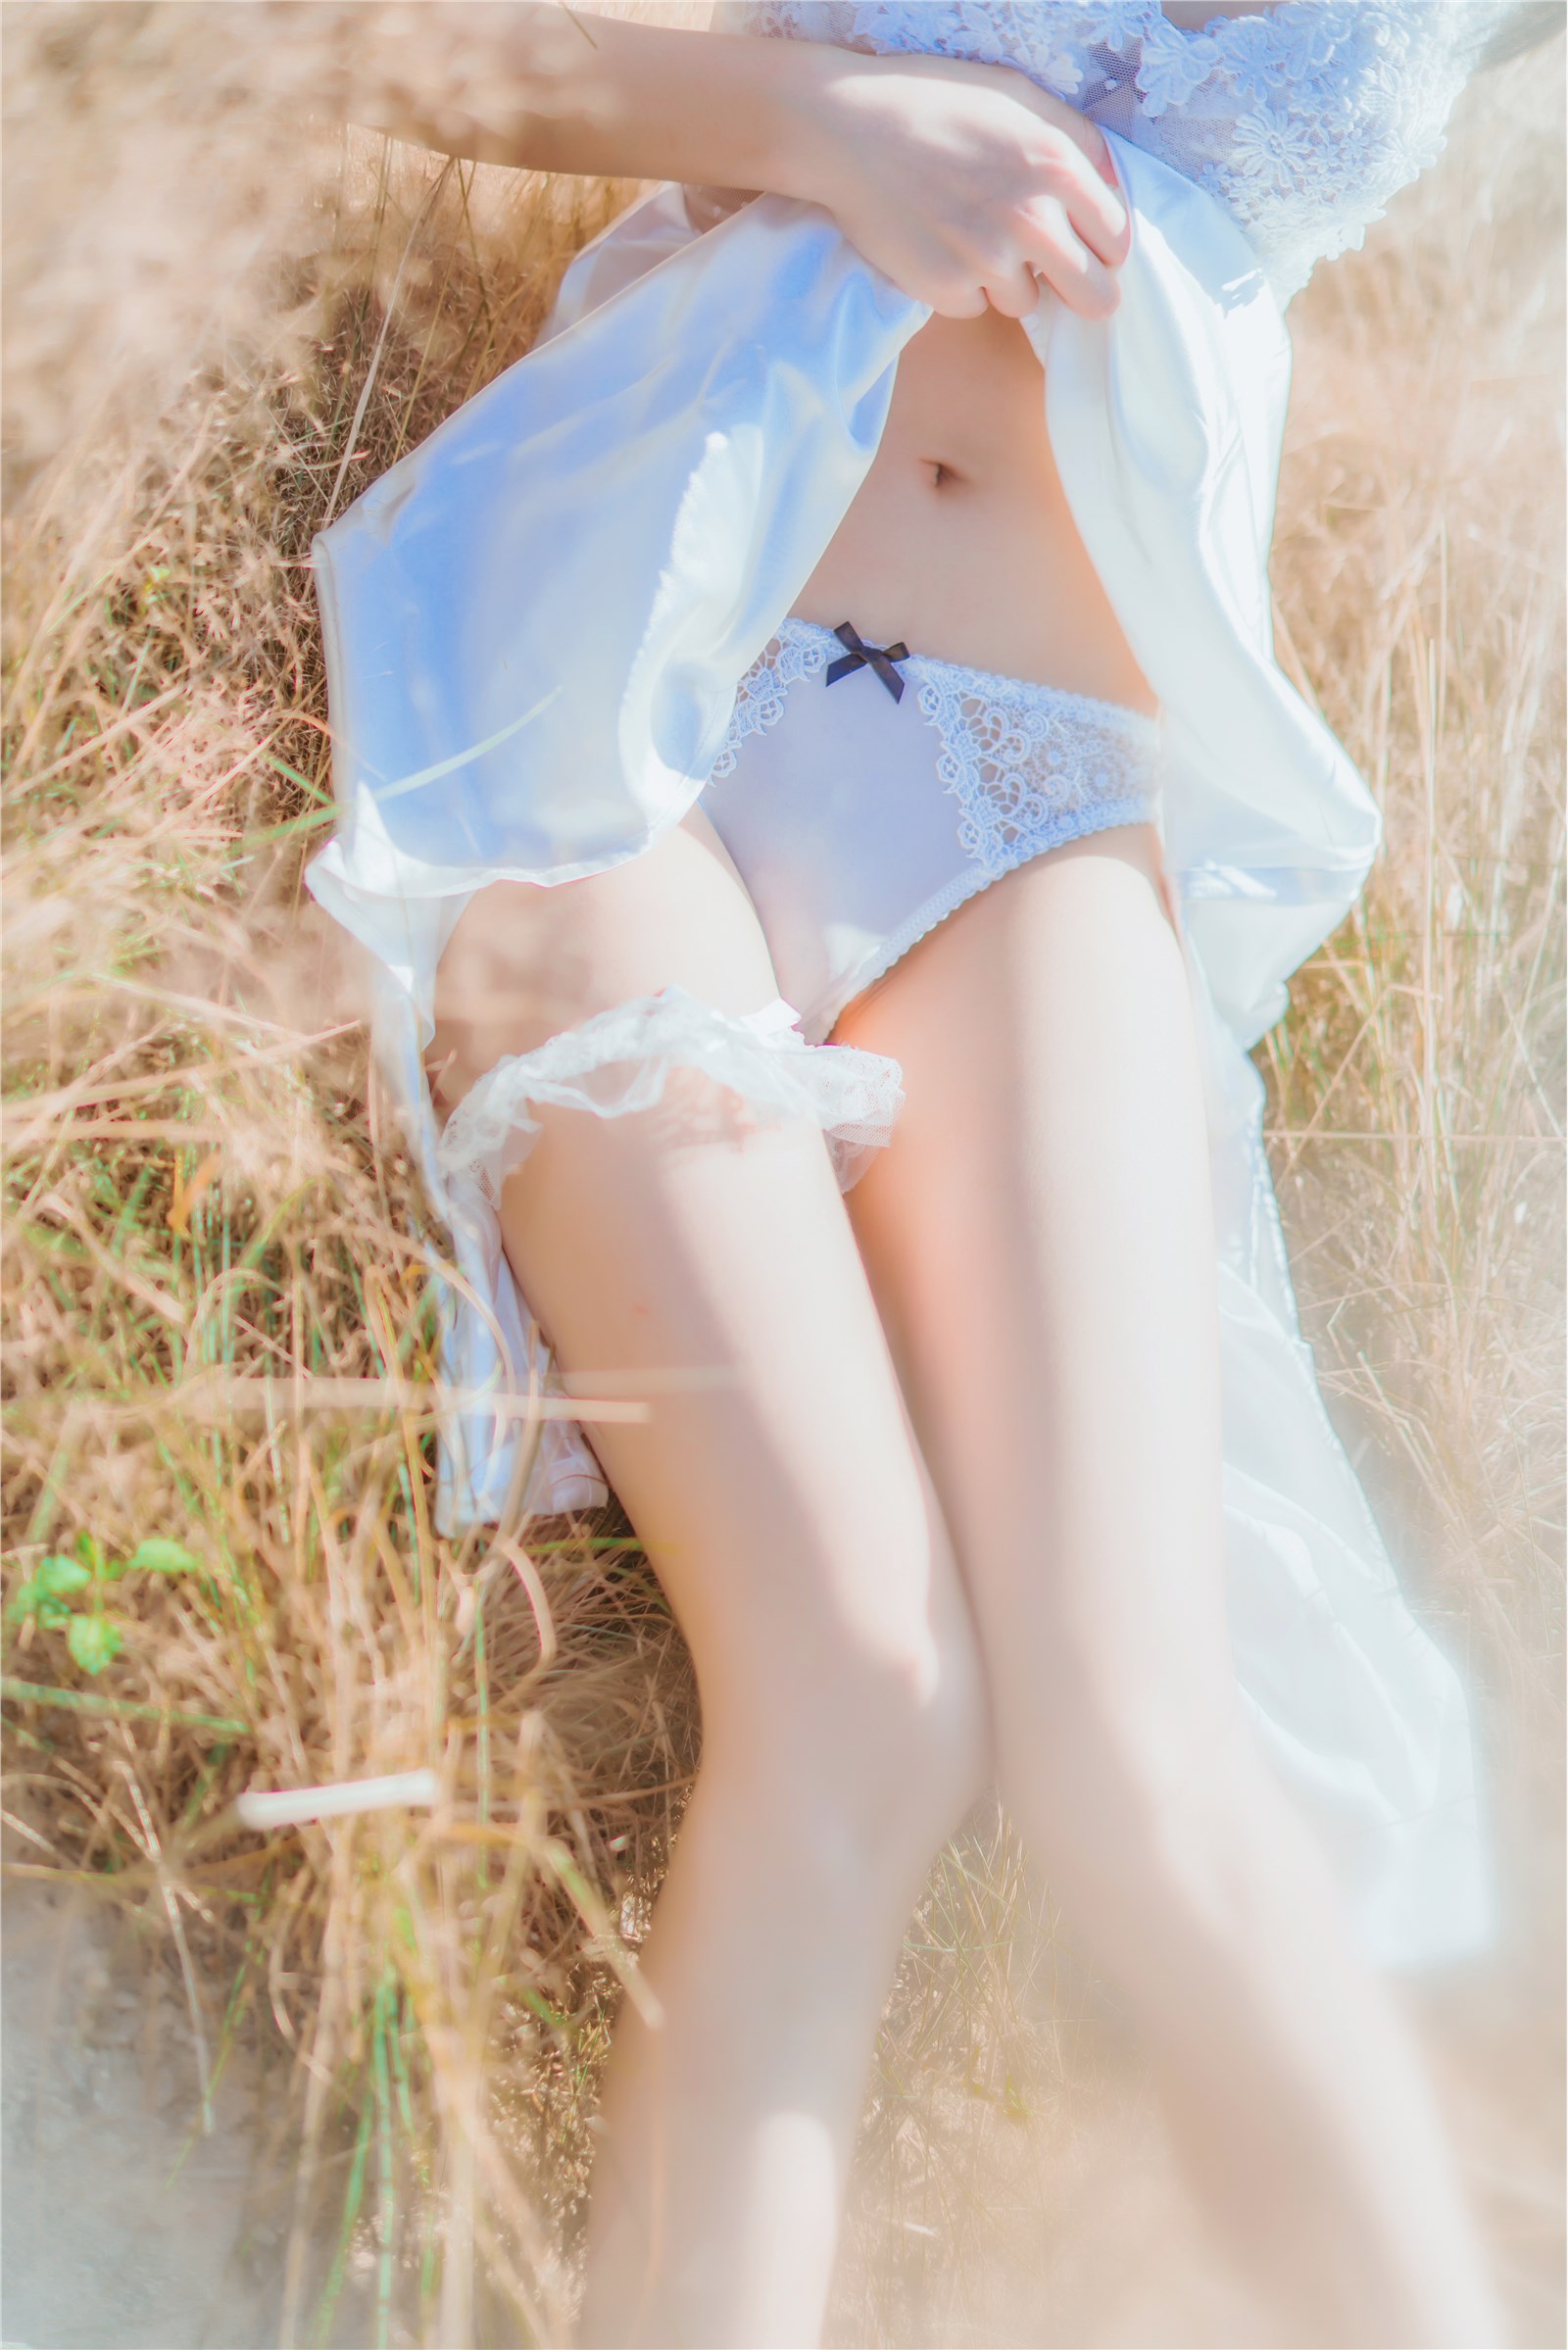 Ourei -- top NO.014 Hibernating in a white dress(20)